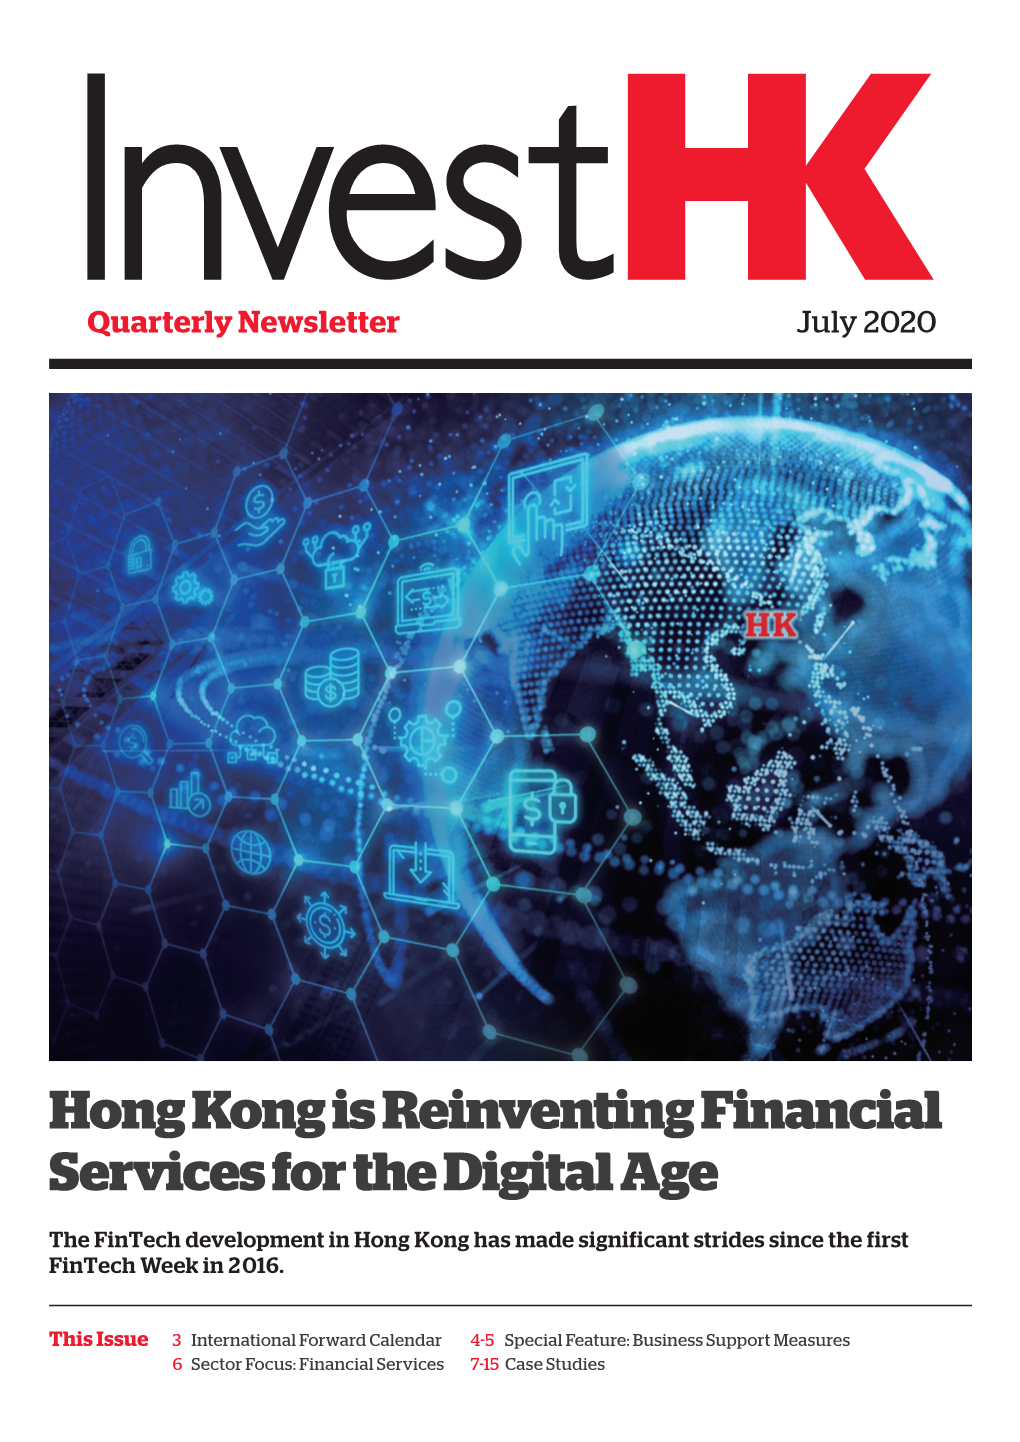 Hong Kong Is Reinventing Financial Services for the Digital Age